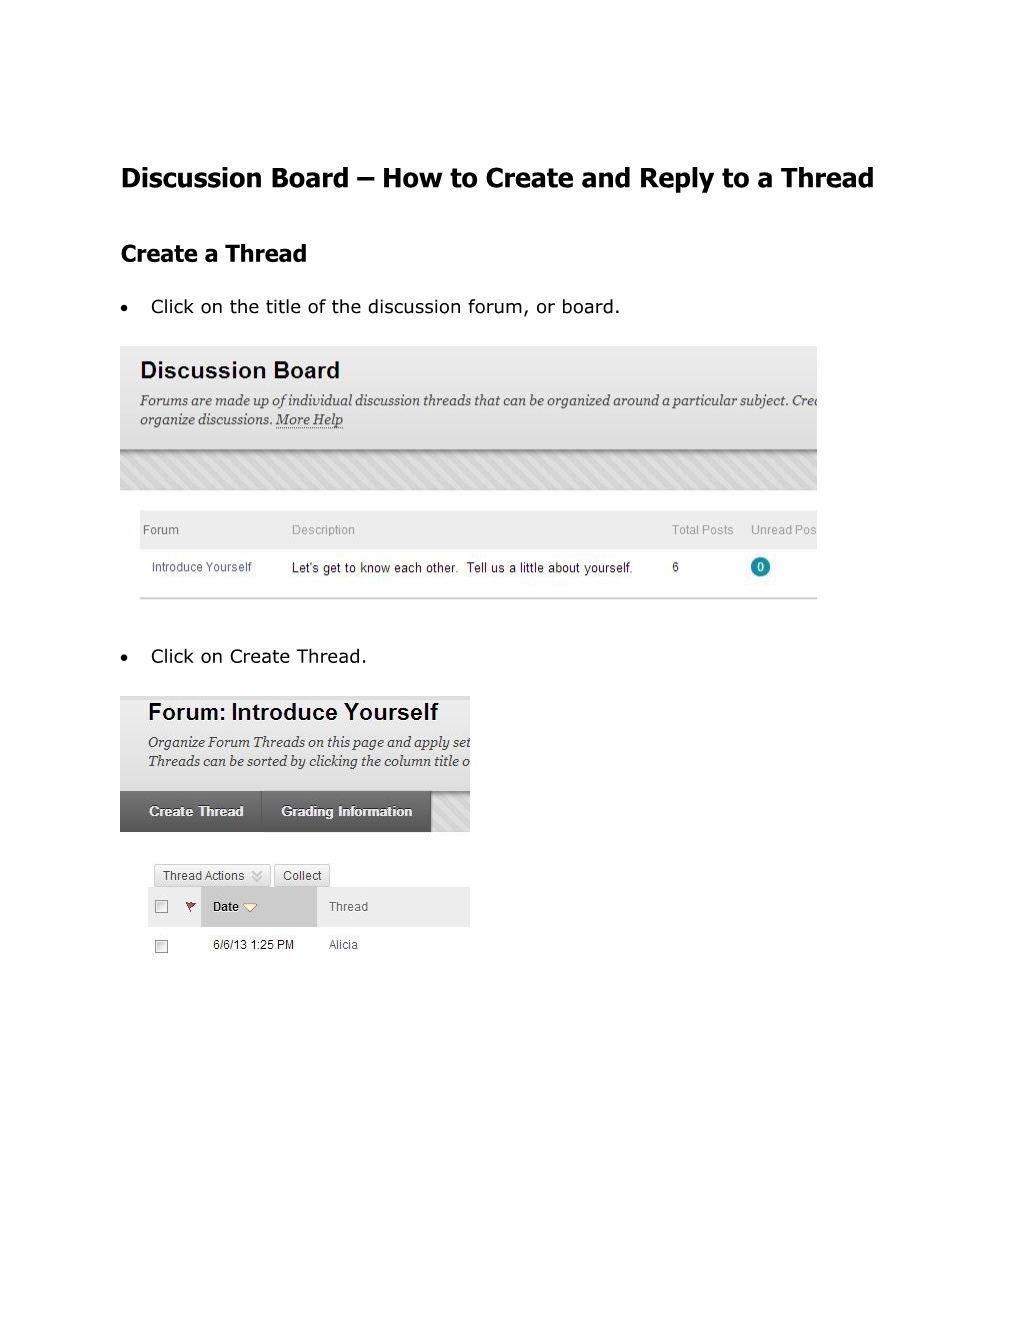 Discussion Board How to Create and Reply to a Thread